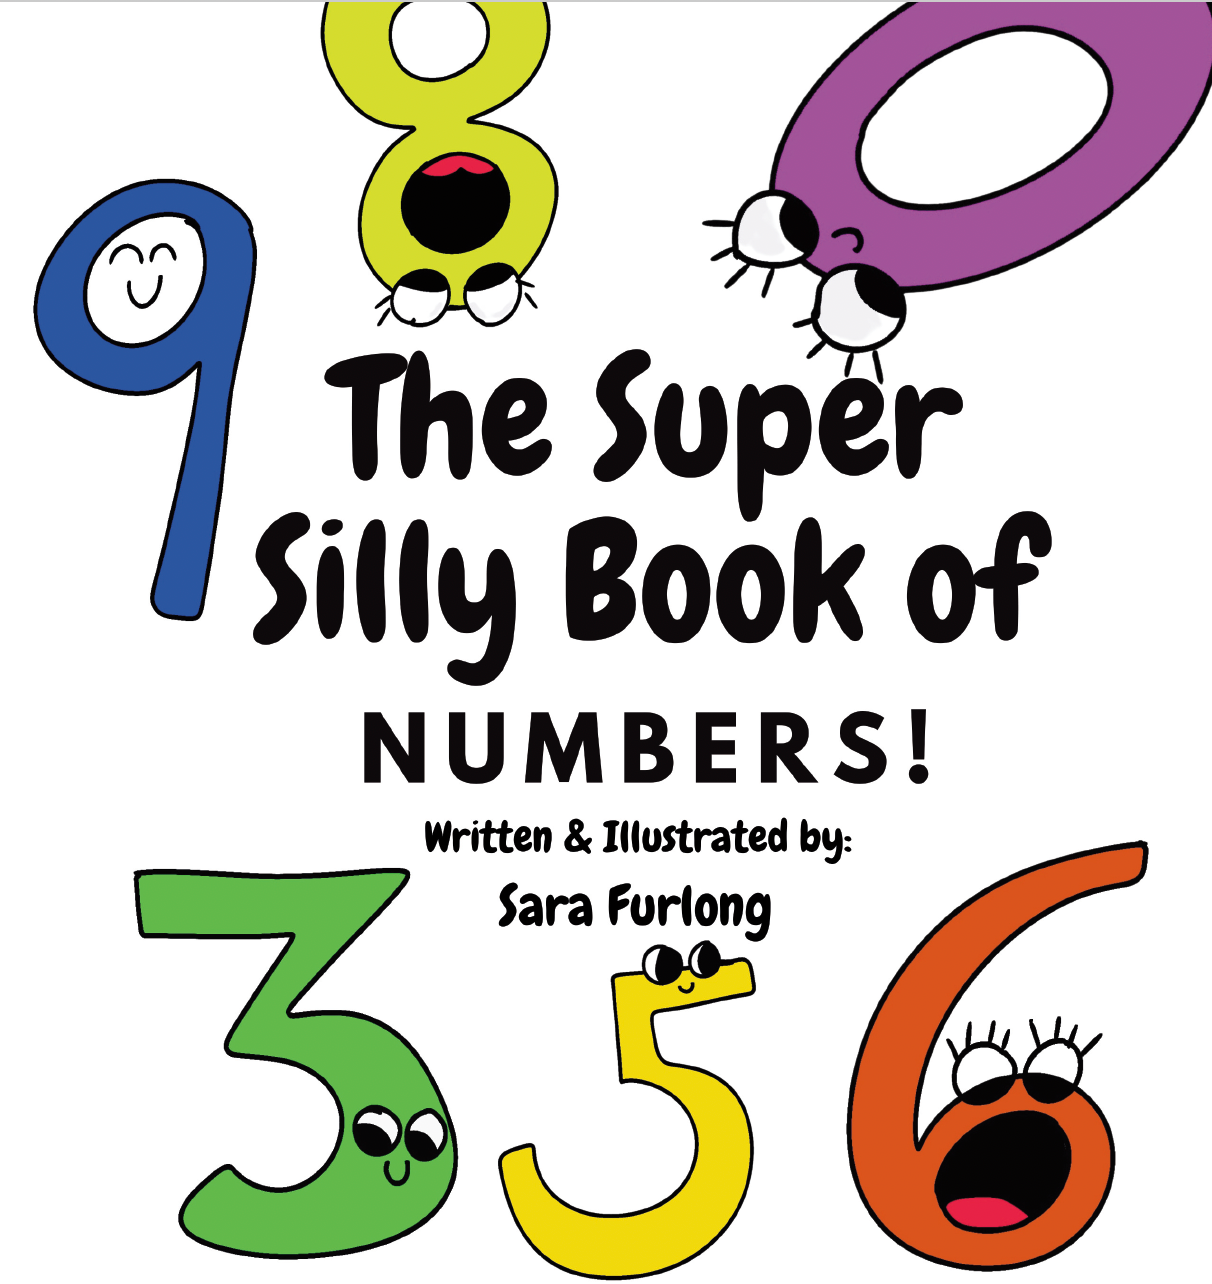 The Super Silly Book of Numbers!